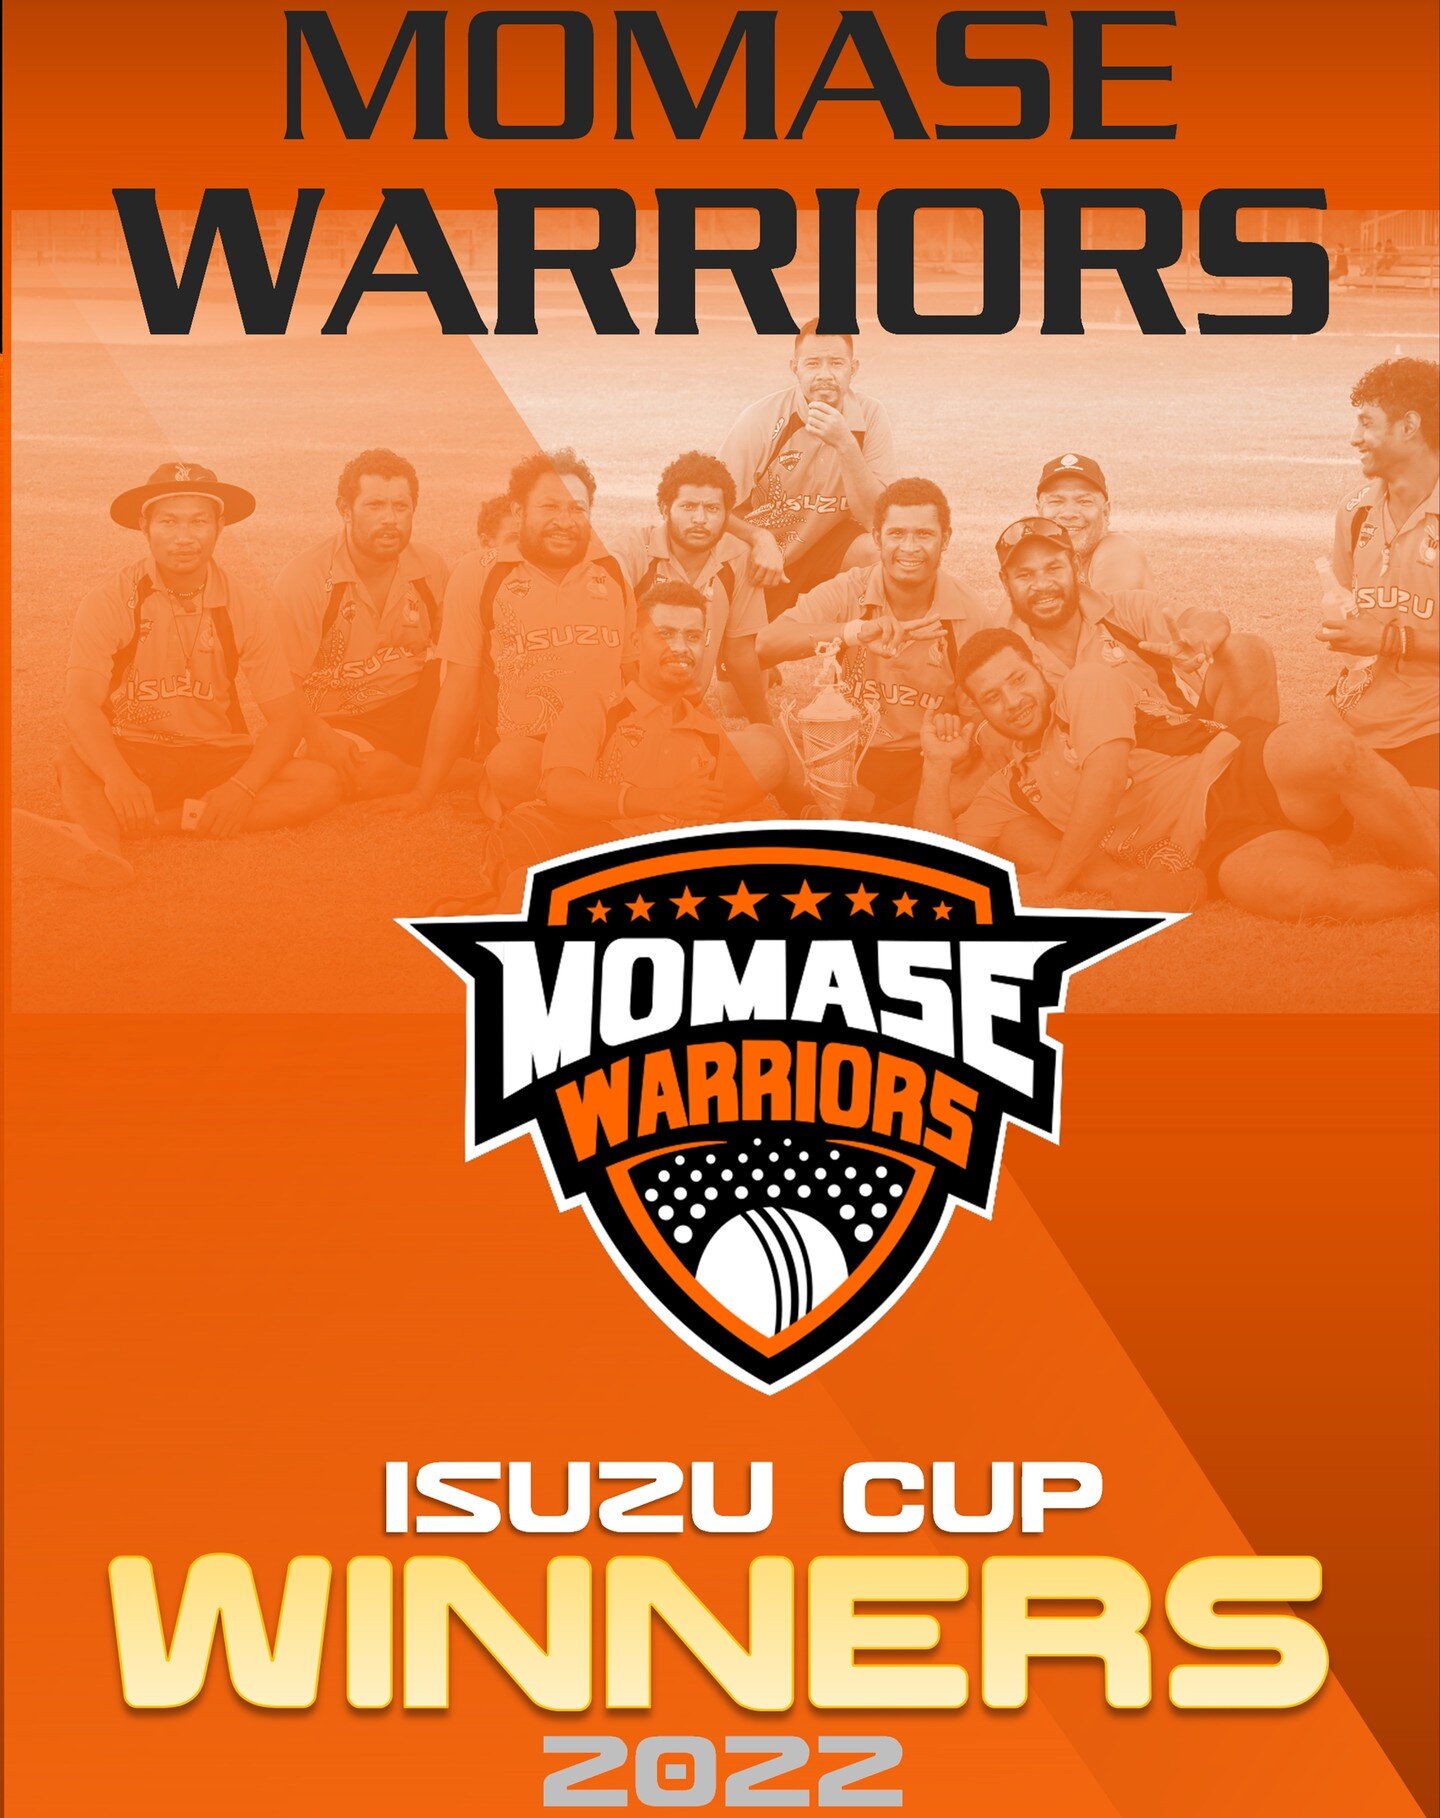 MEN'S ISUZU CUP 50 OVER CAMPIONS

CONGRATULATIONS to the MOMASE WARRIORS on becoming the WINNERS of the ISUZU CUP 50 OVER